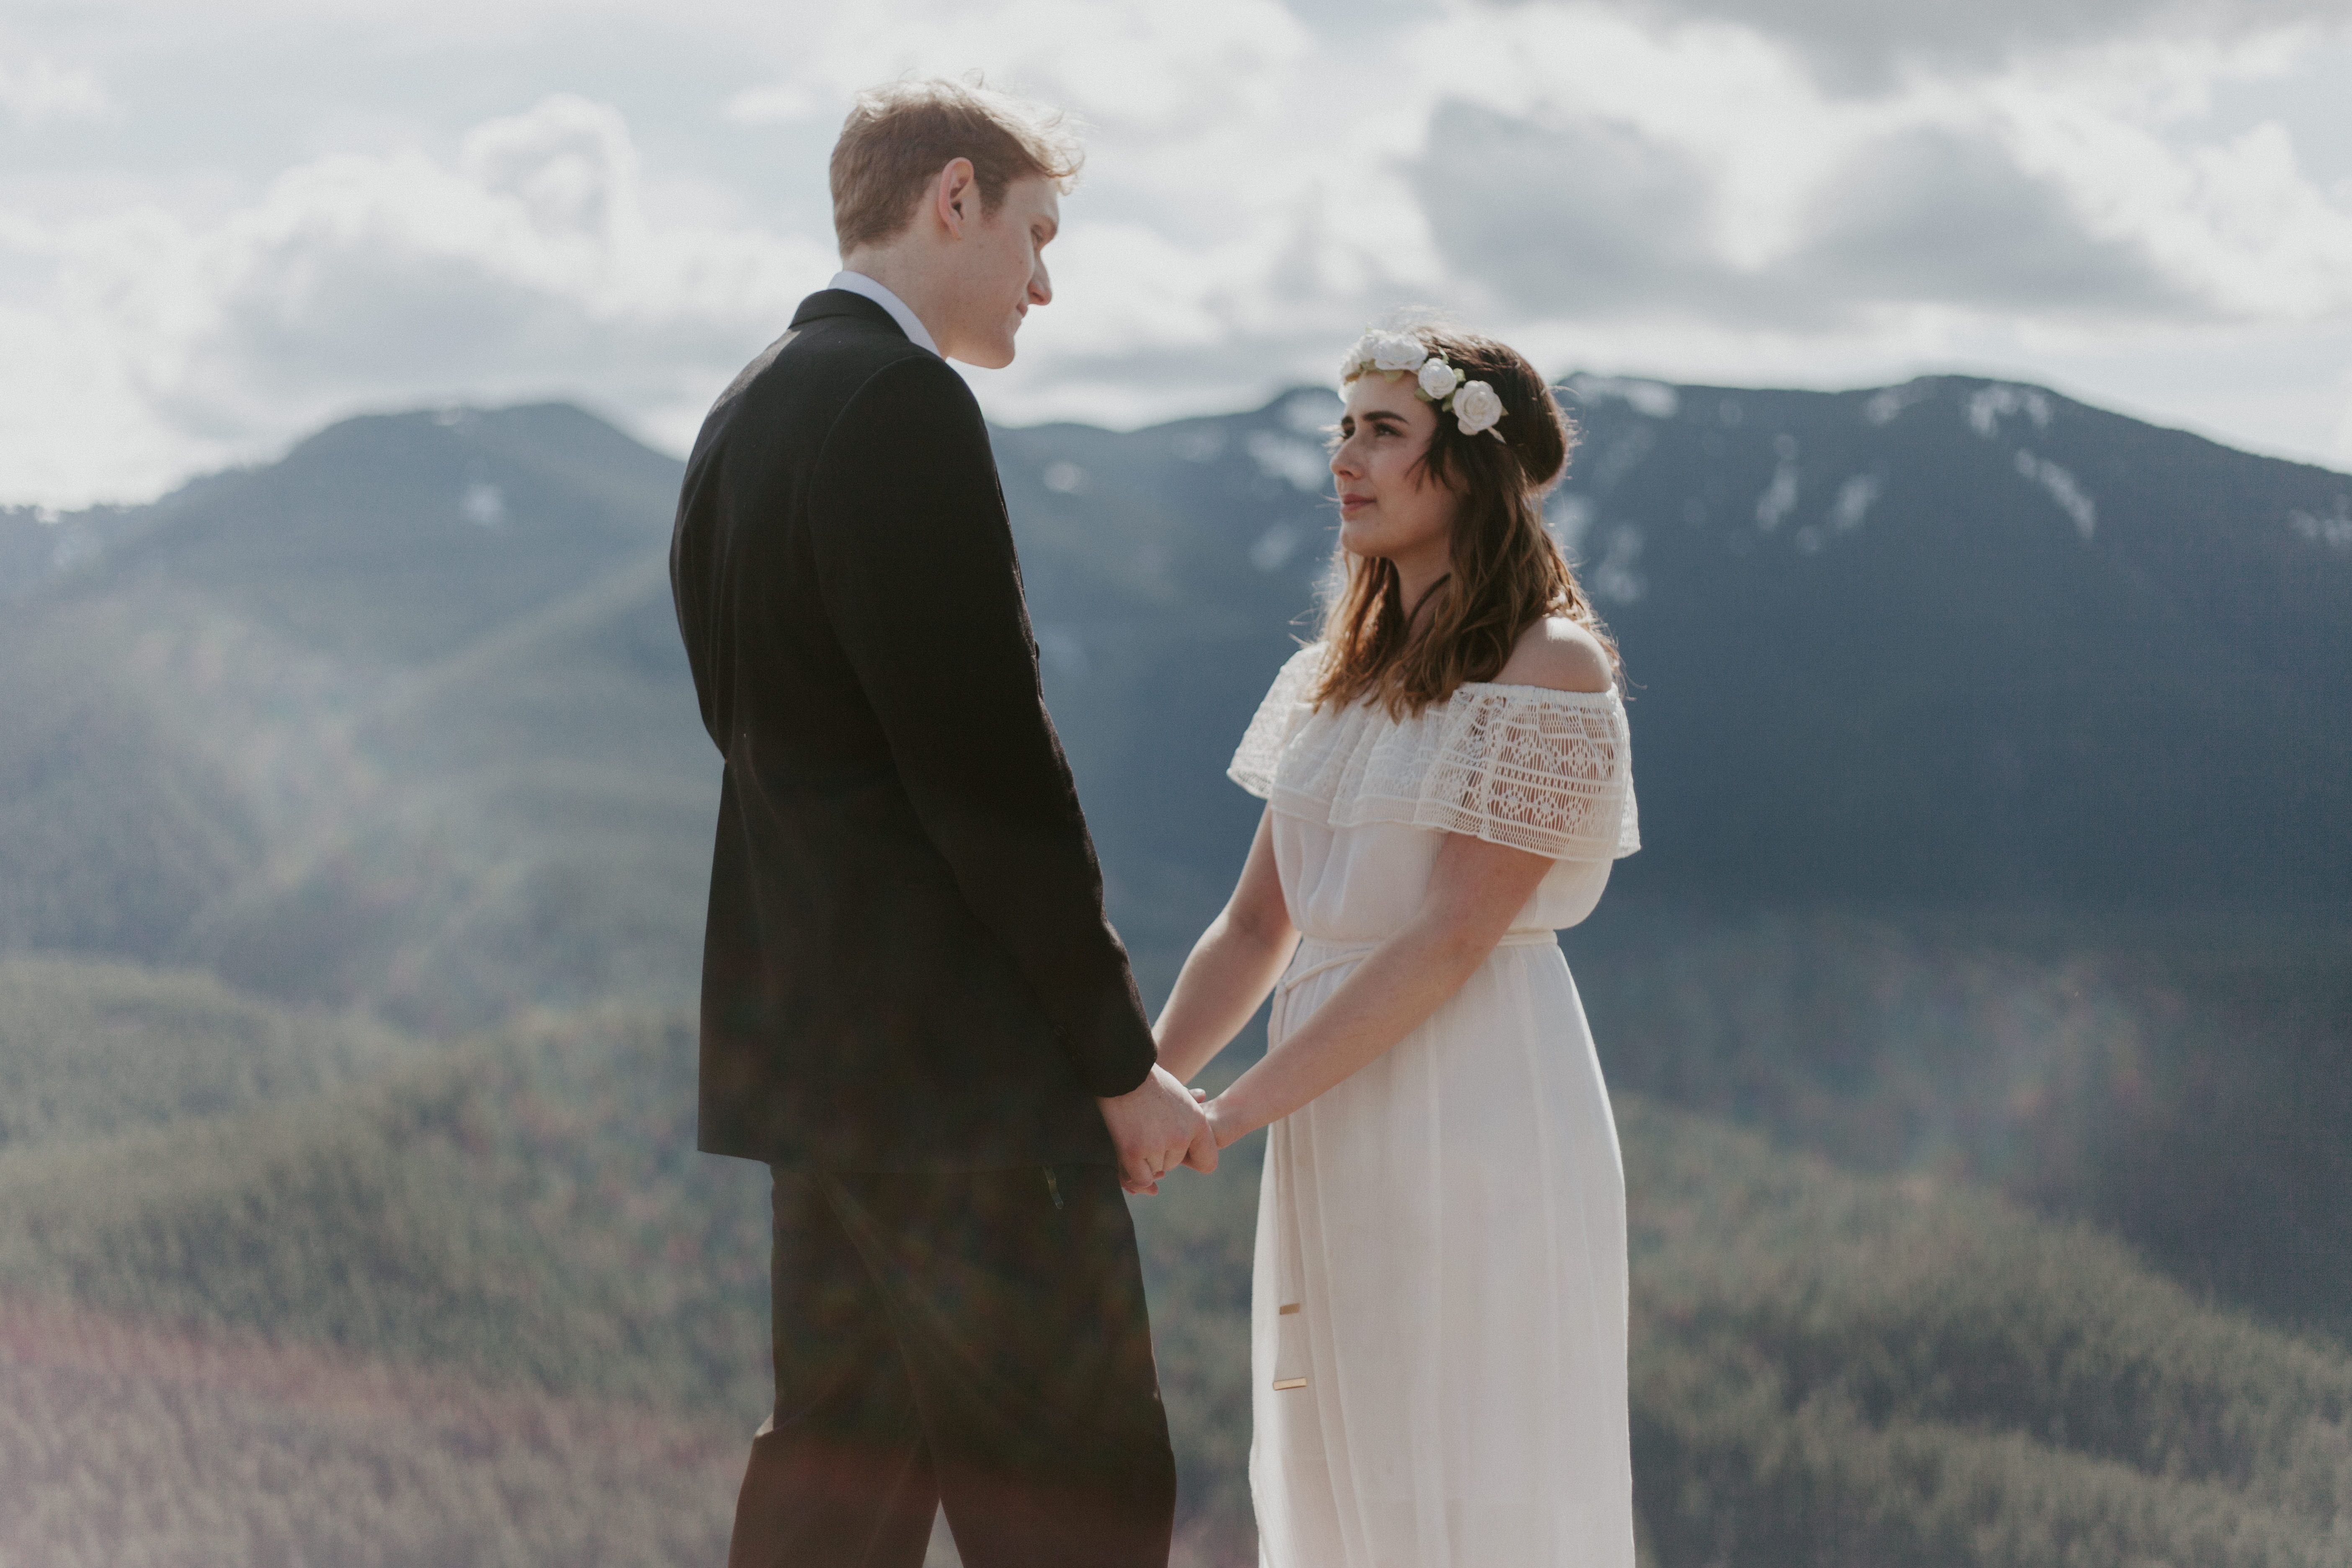 Michael and Winnifred hold hands with a view of Washington state in the background. Elopement adventure shoot at Rattlesnake Ledge, Washington.